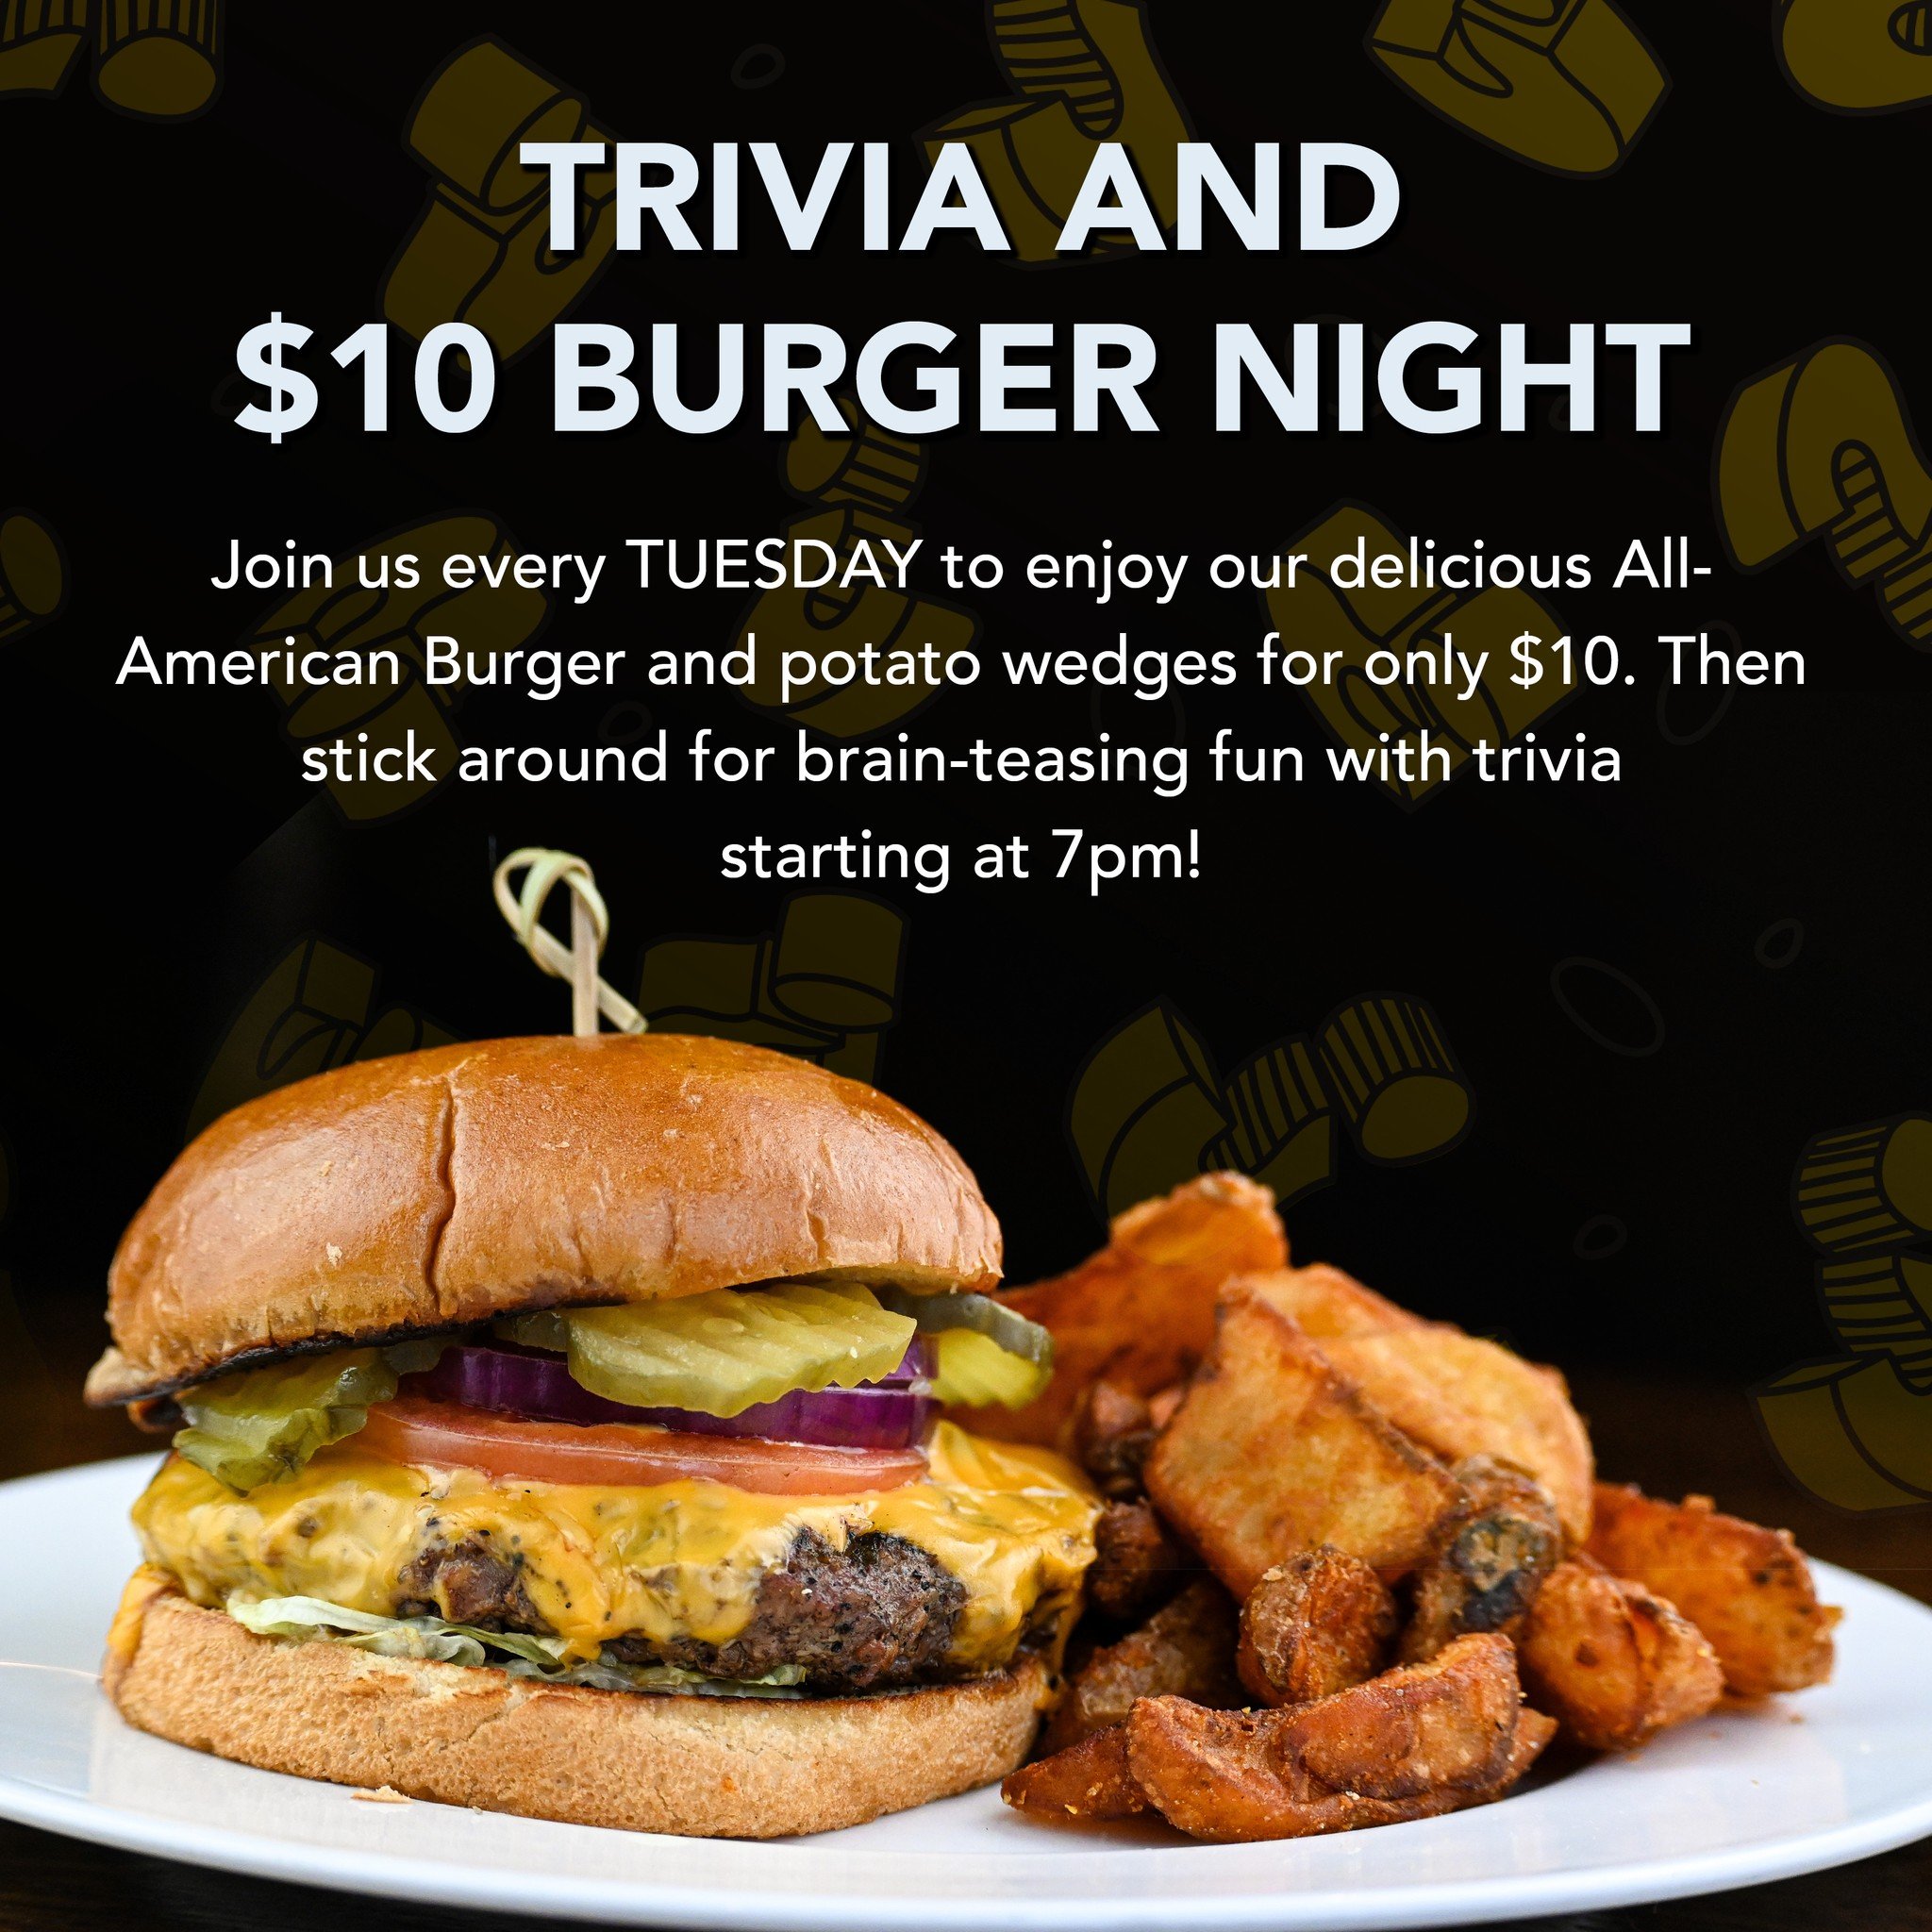 Looking for the ultimate Tuesday night plans? Swing by for our $10 All-American Burger special and stay for trivia at 7pm! It's the perfect way to satisfy your cravings and challenge your mind. 🍔🧠

#madboarnc #wallacenc #exit385 #tuesdaydeals #tues